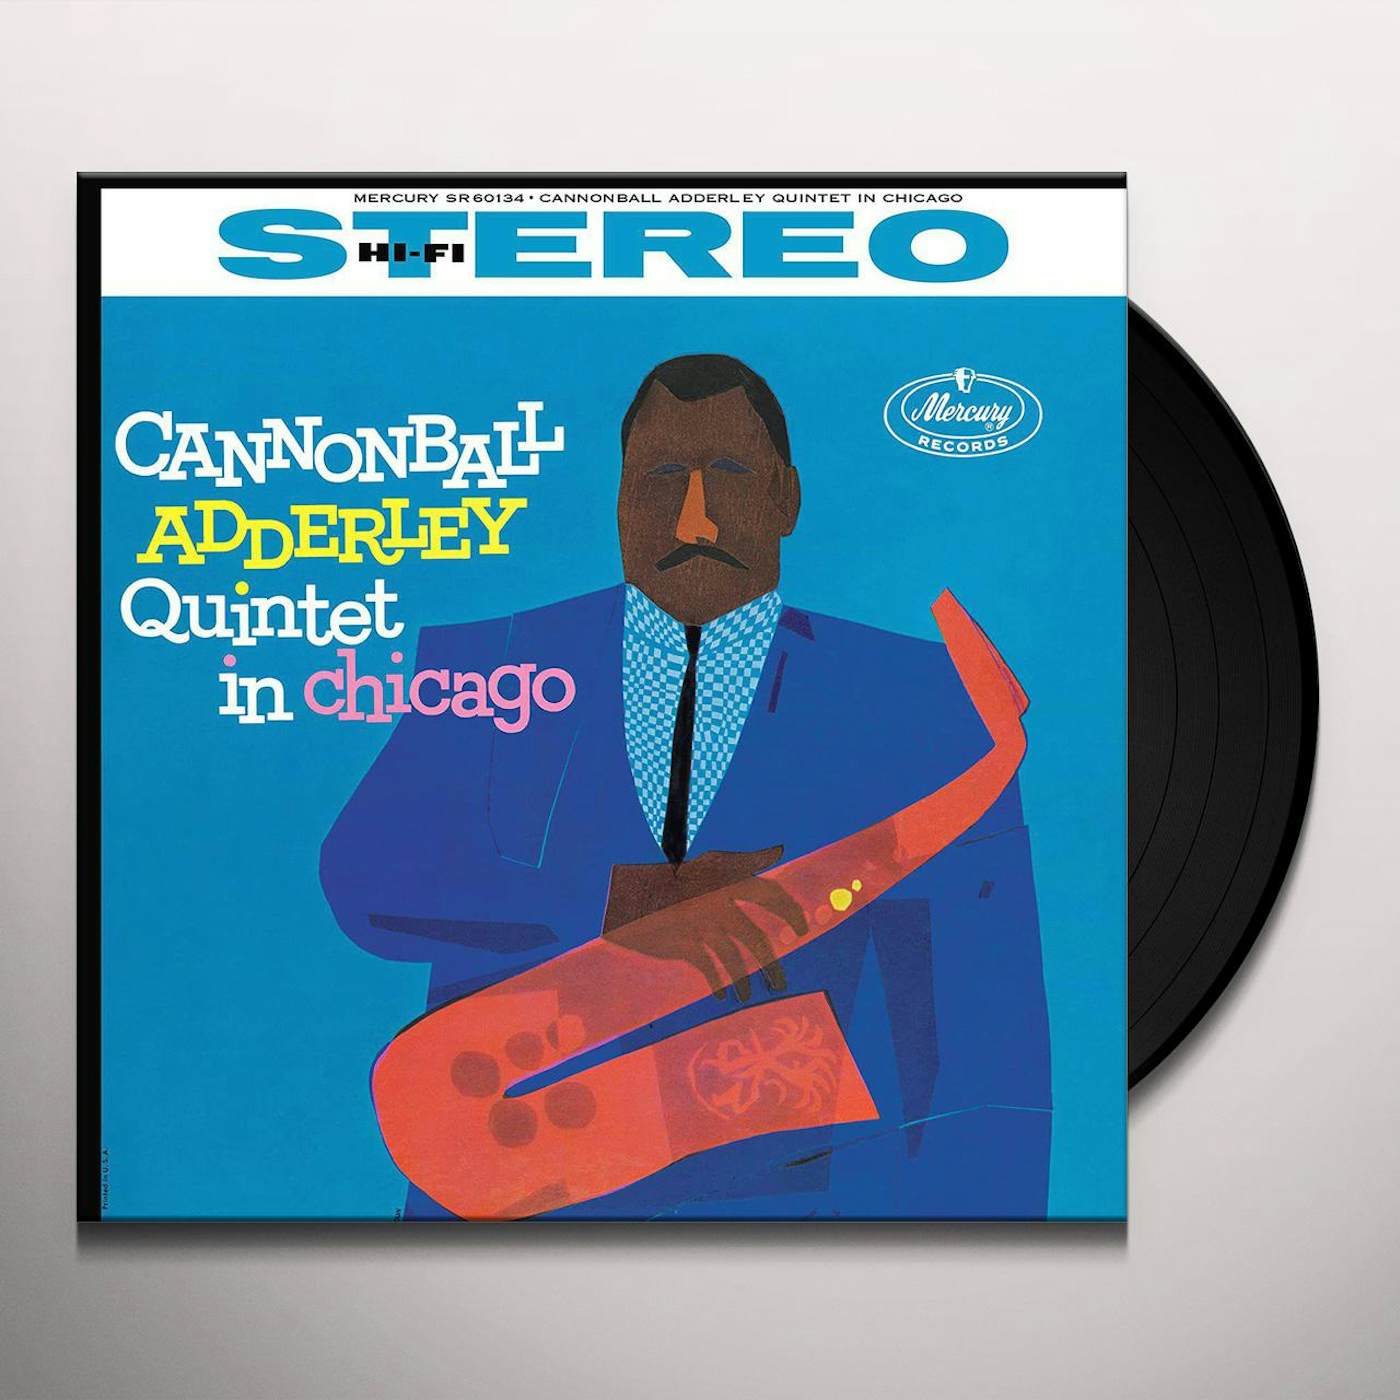 Cannonball Adderley Quintet In Chicago (Verve Acoustic Vinyl Record)